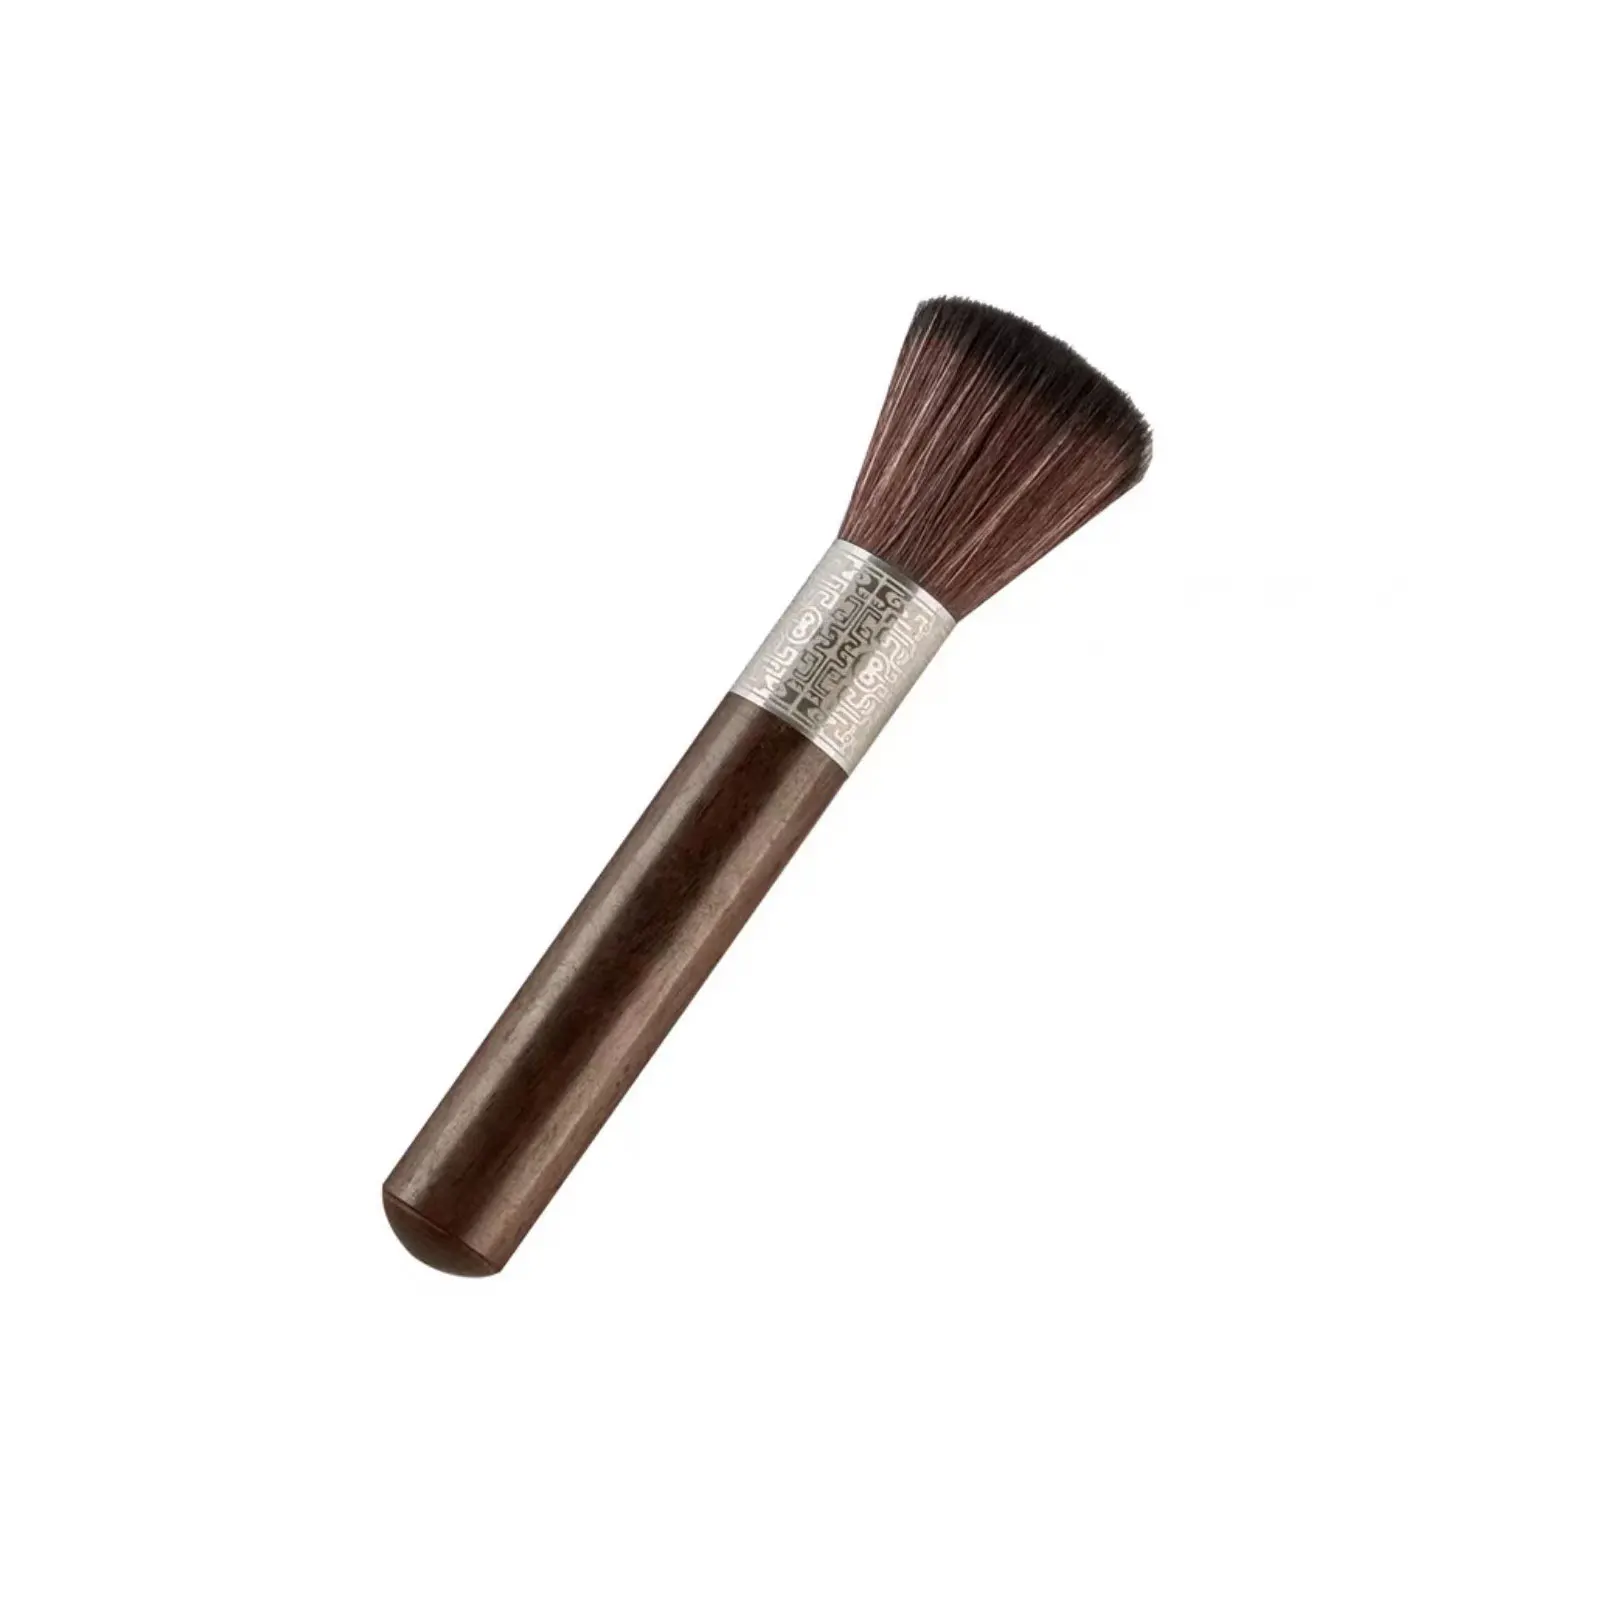 Wooden Espresso Black Coffee Powder Washing Brush for Coffe Filter Maker Barista Cleaning Grinder Cafe Tools images - 6